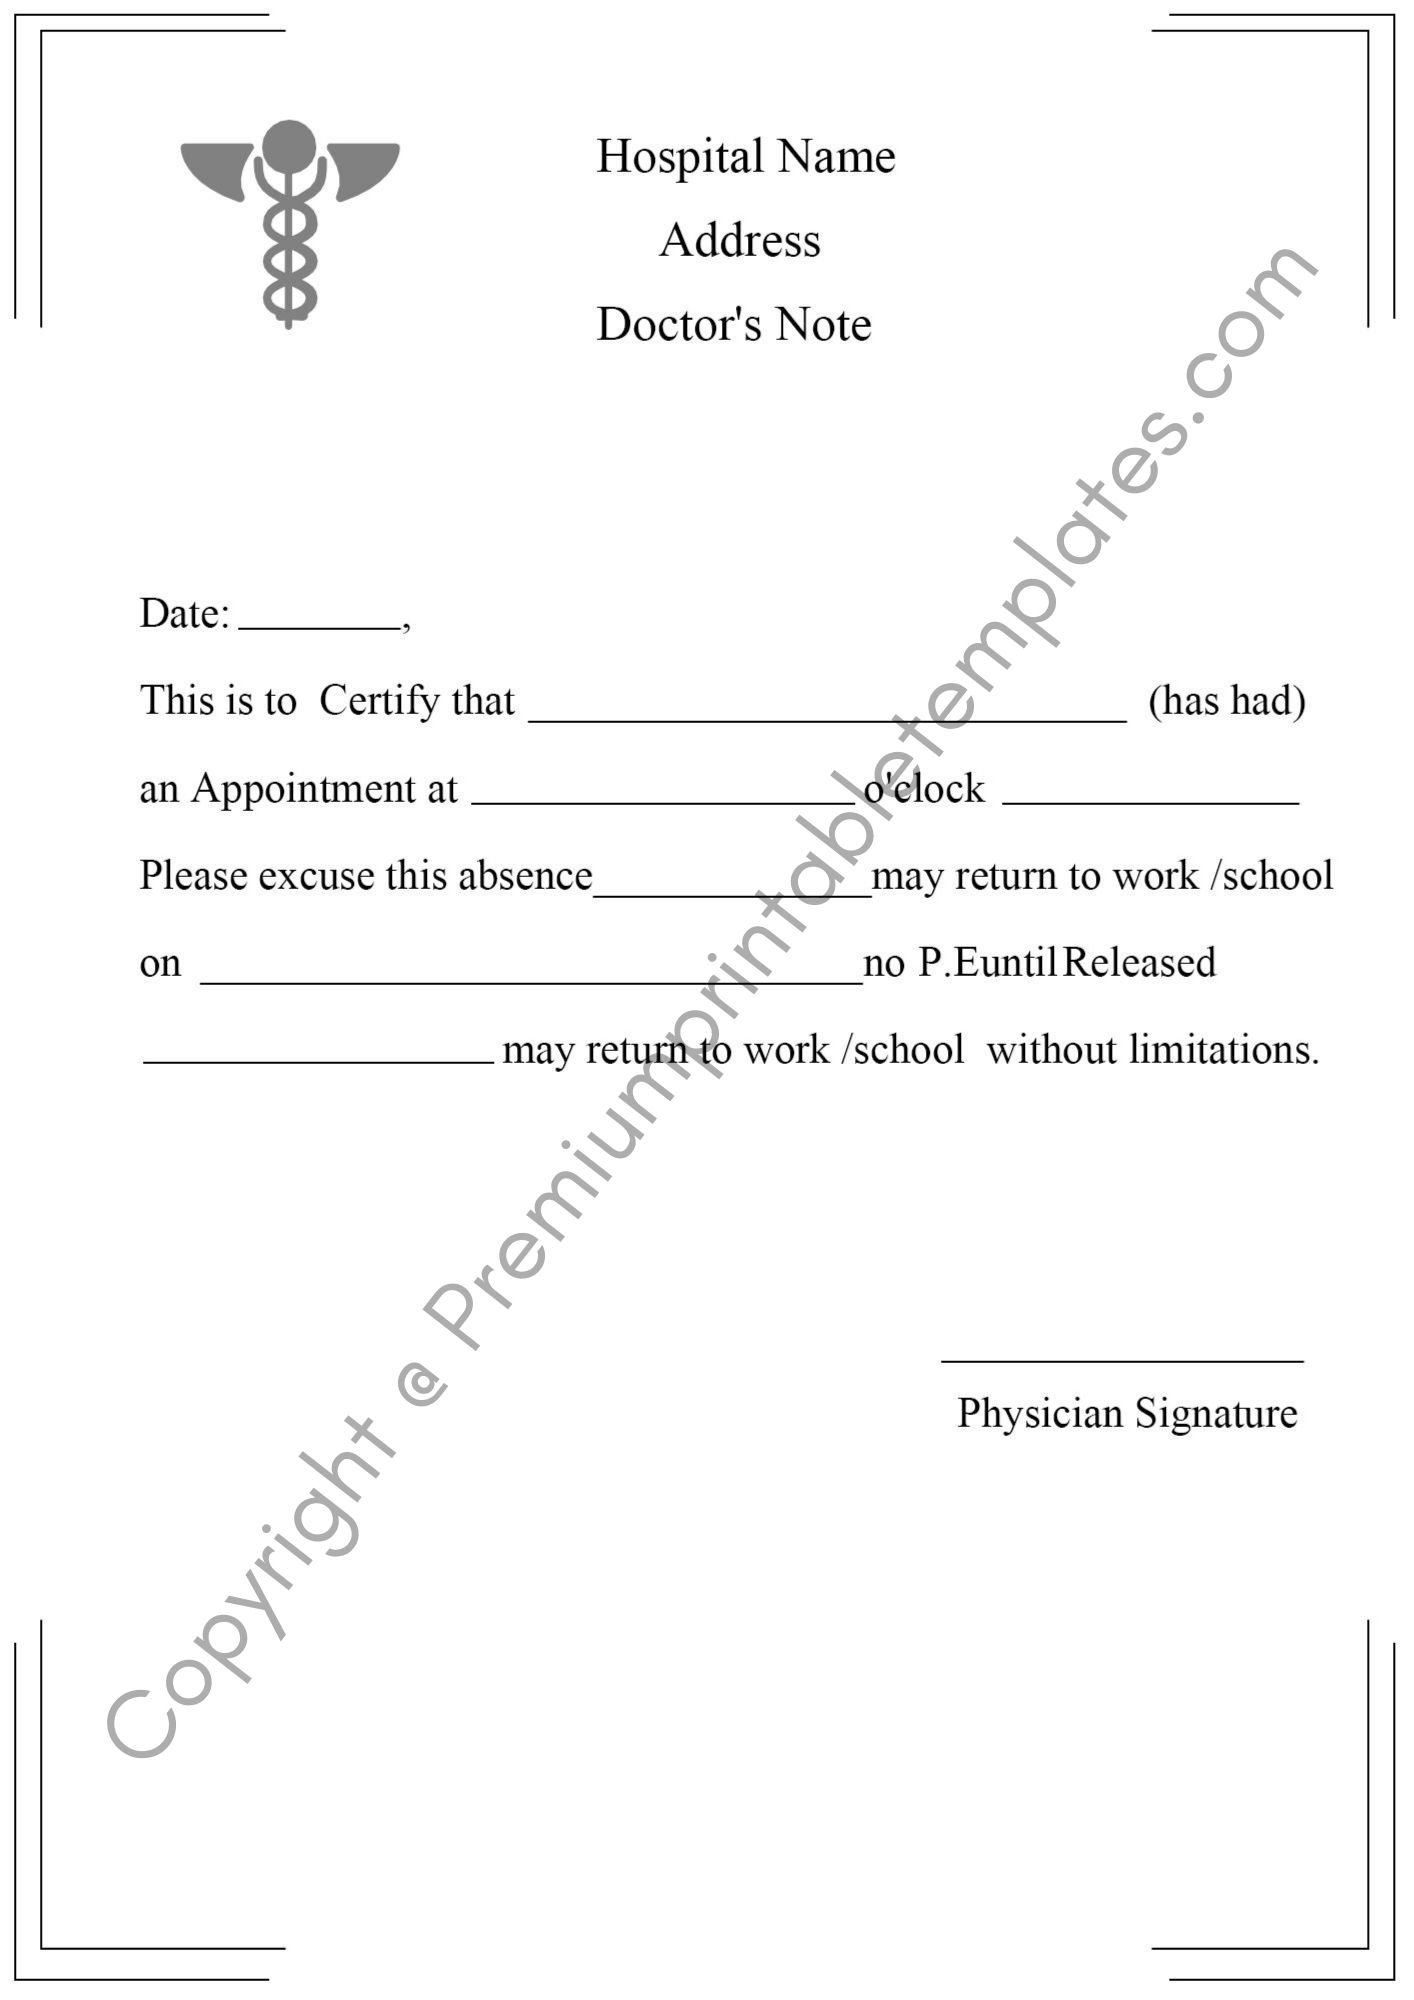 Real Doctors Note For Work  Doctors Note [Pack of 20] Intended For Hospital Note For Work Template